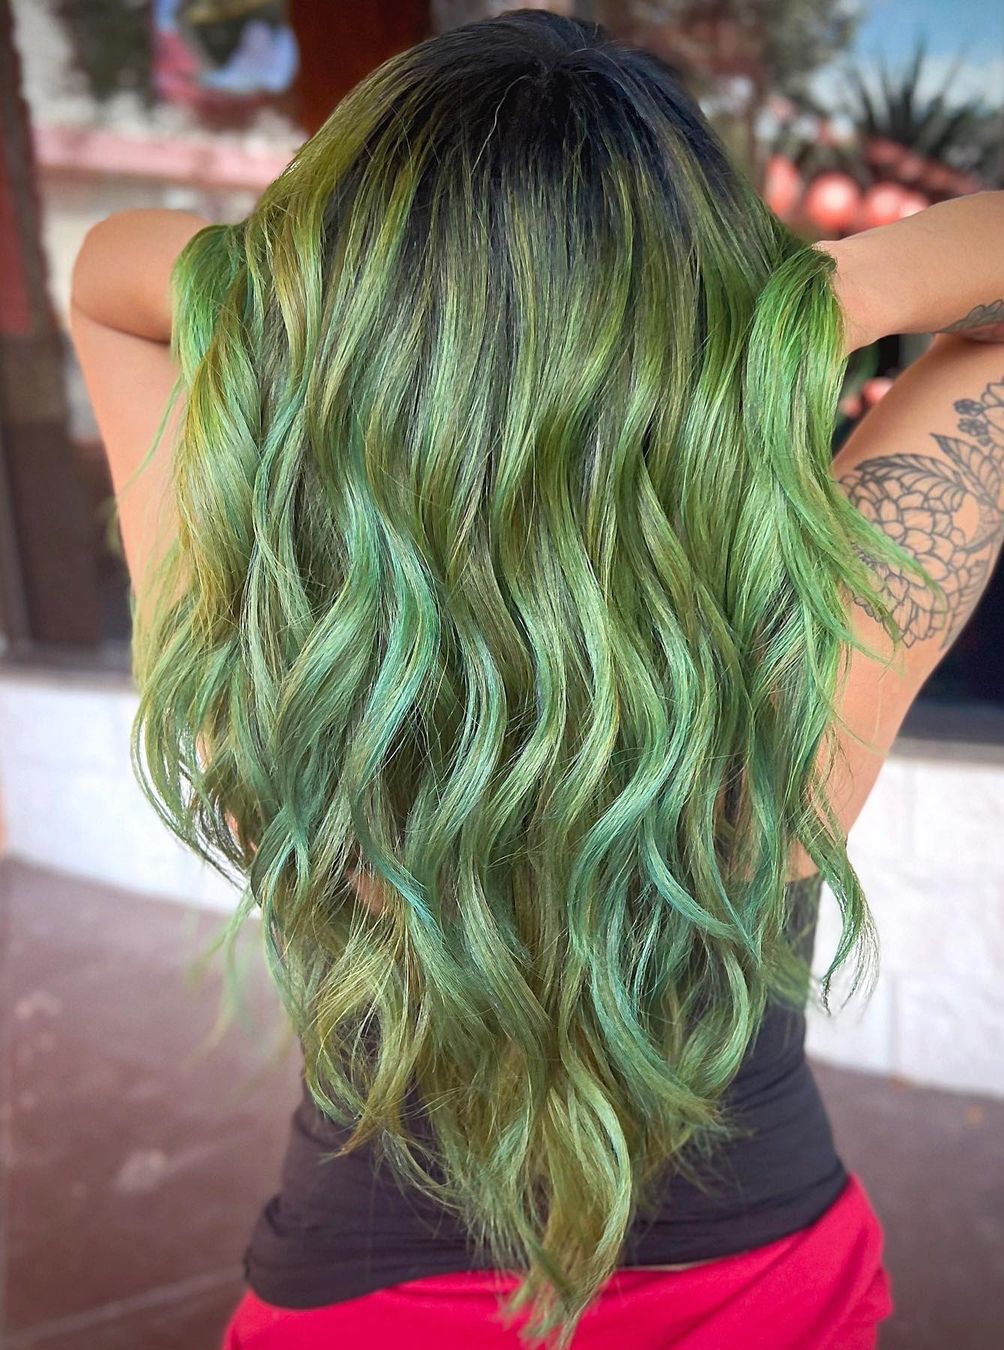 Olive Green Color on Long Wavy Hair